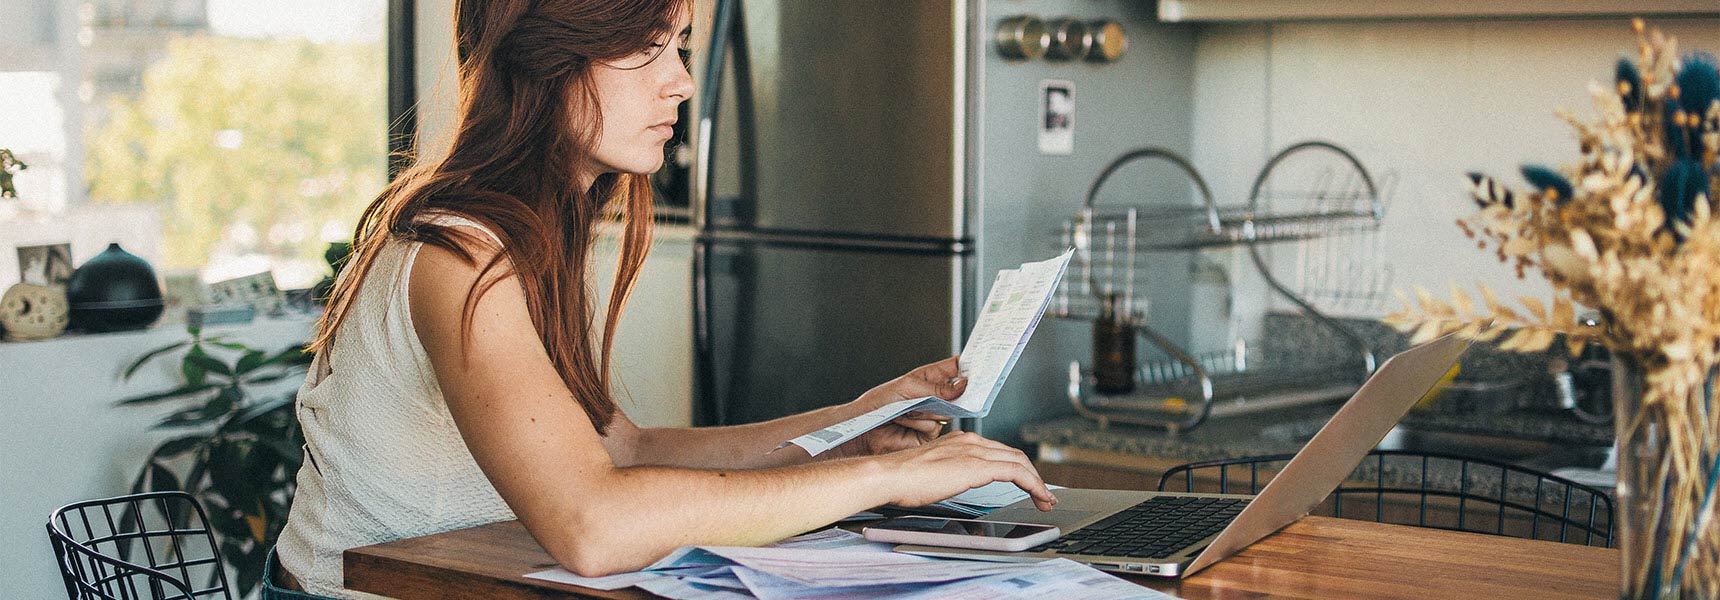 Photo of woman sitting in her kitchen, filing her taxes on her laptop.